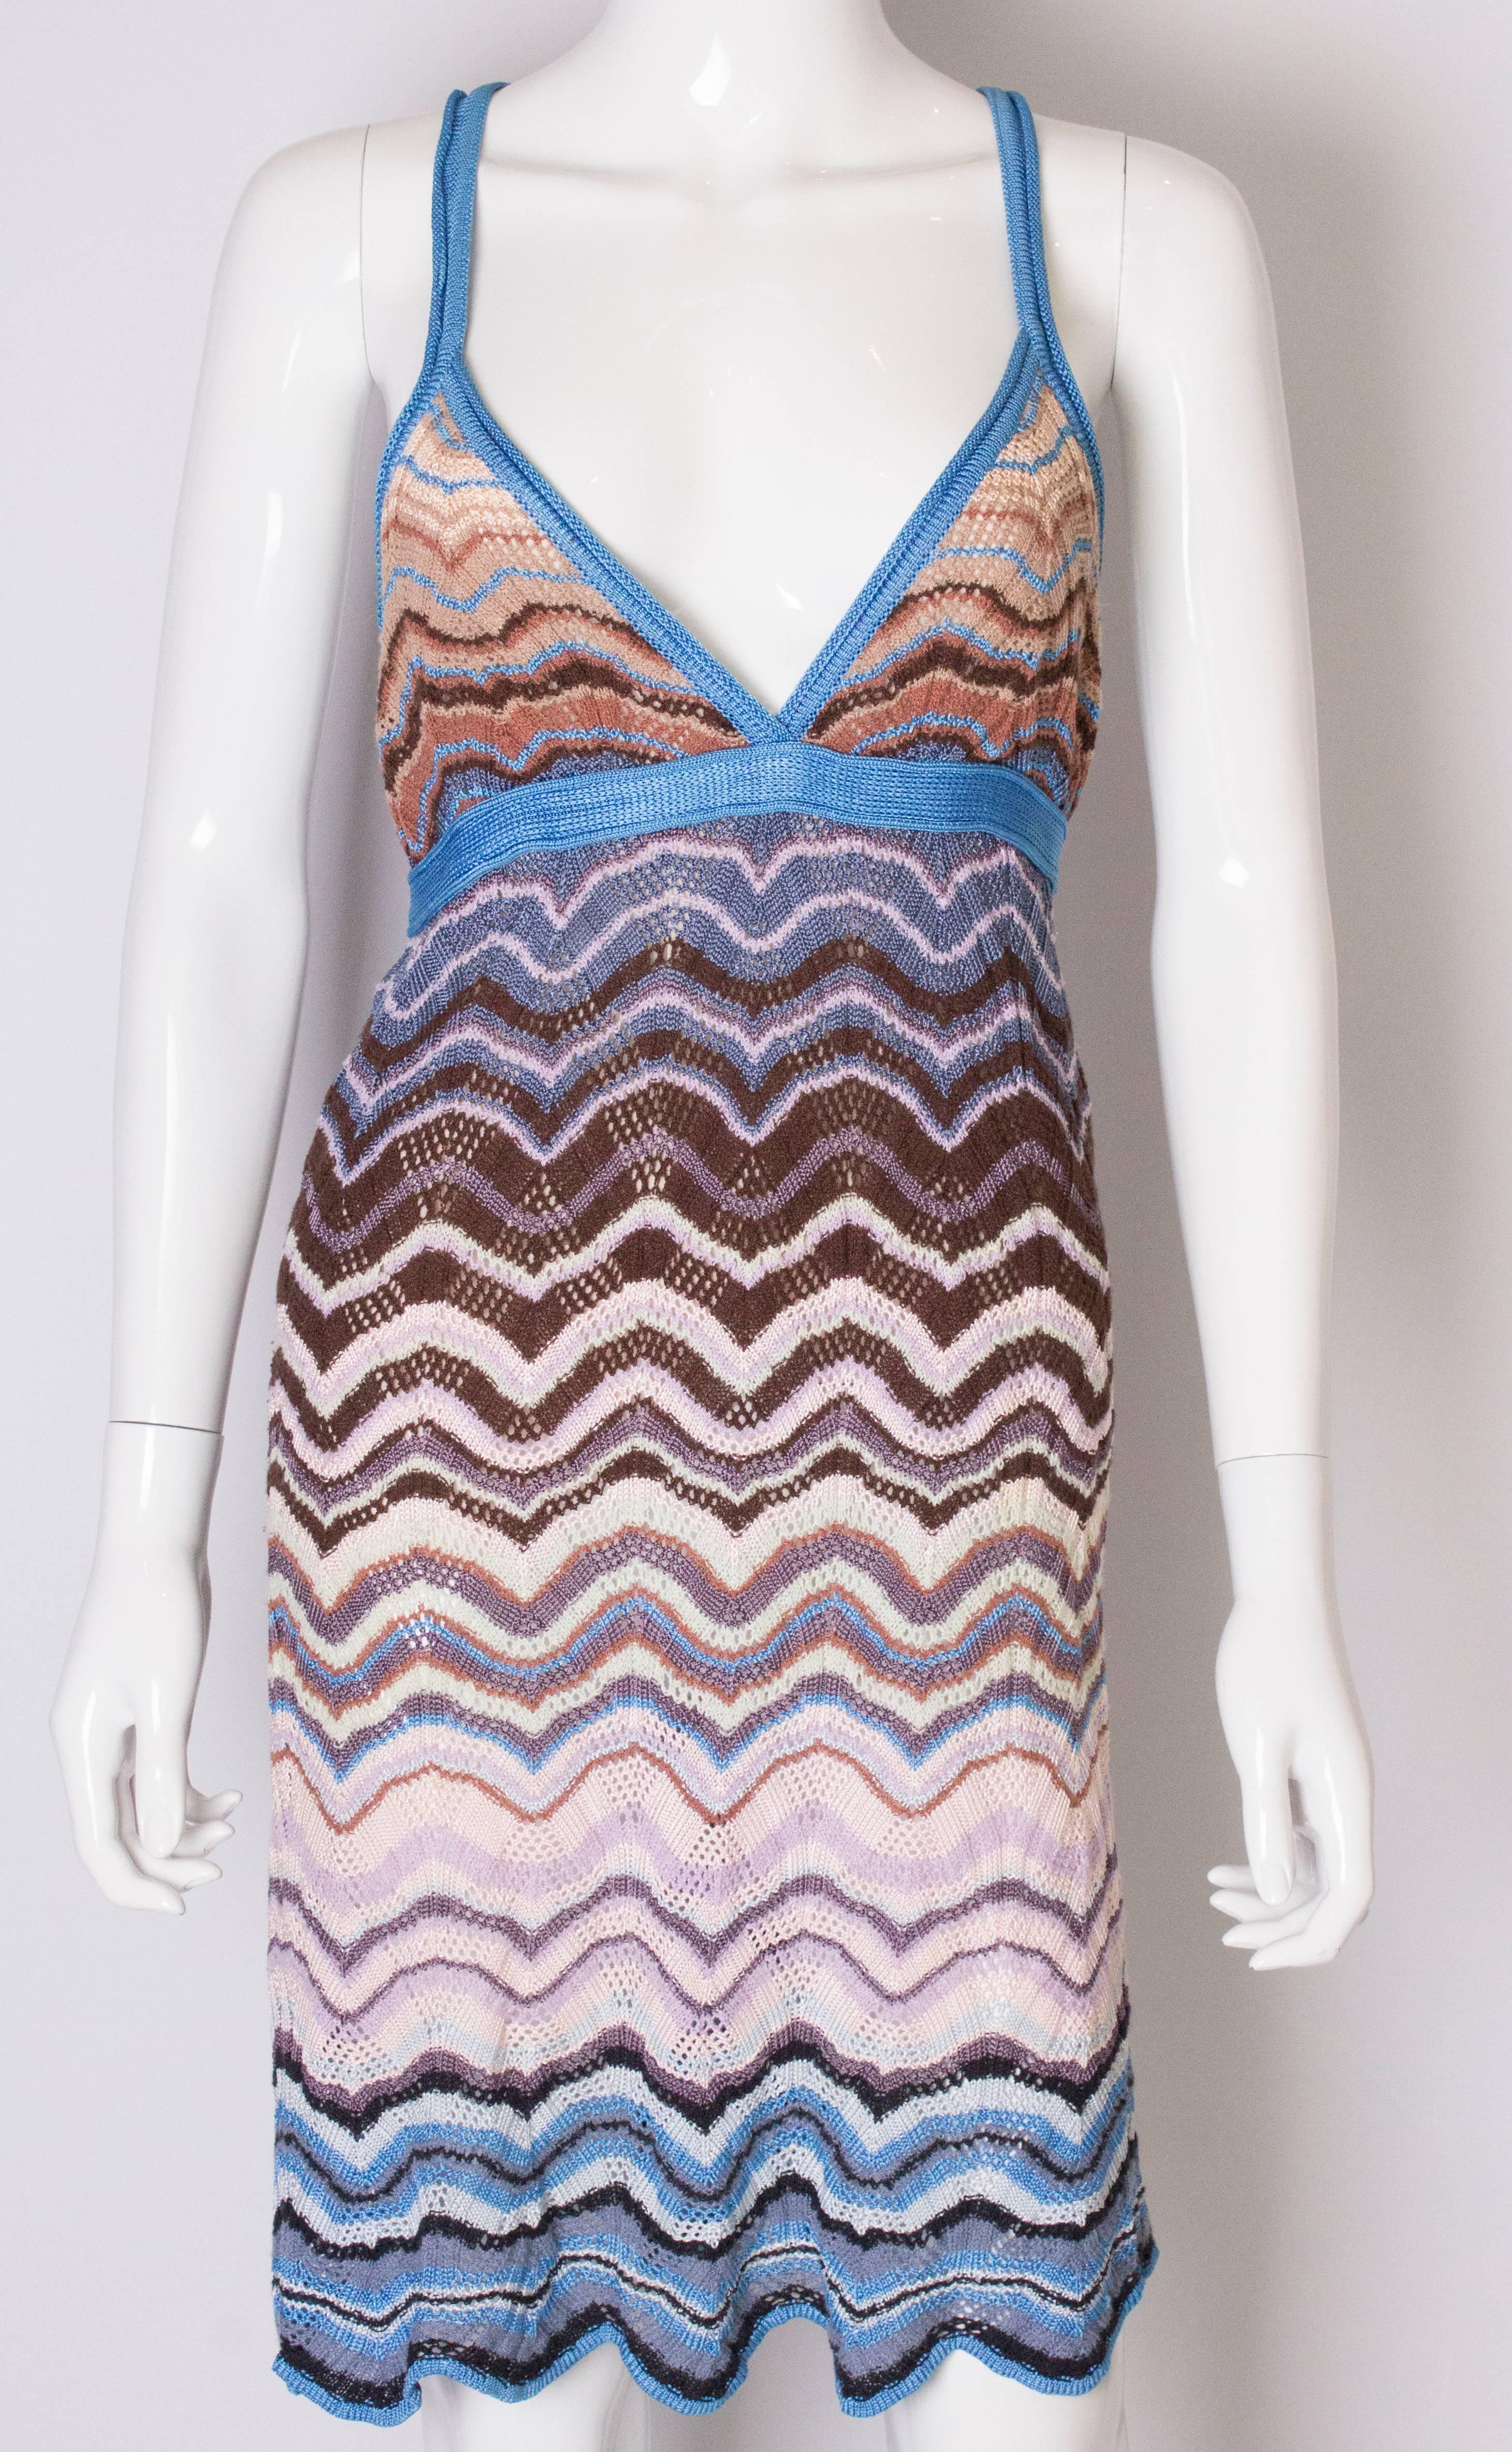 A chic sundress by Missoni, Brown label. The dress is in blue  browns and cream with a cross over back. It is lined in silk.